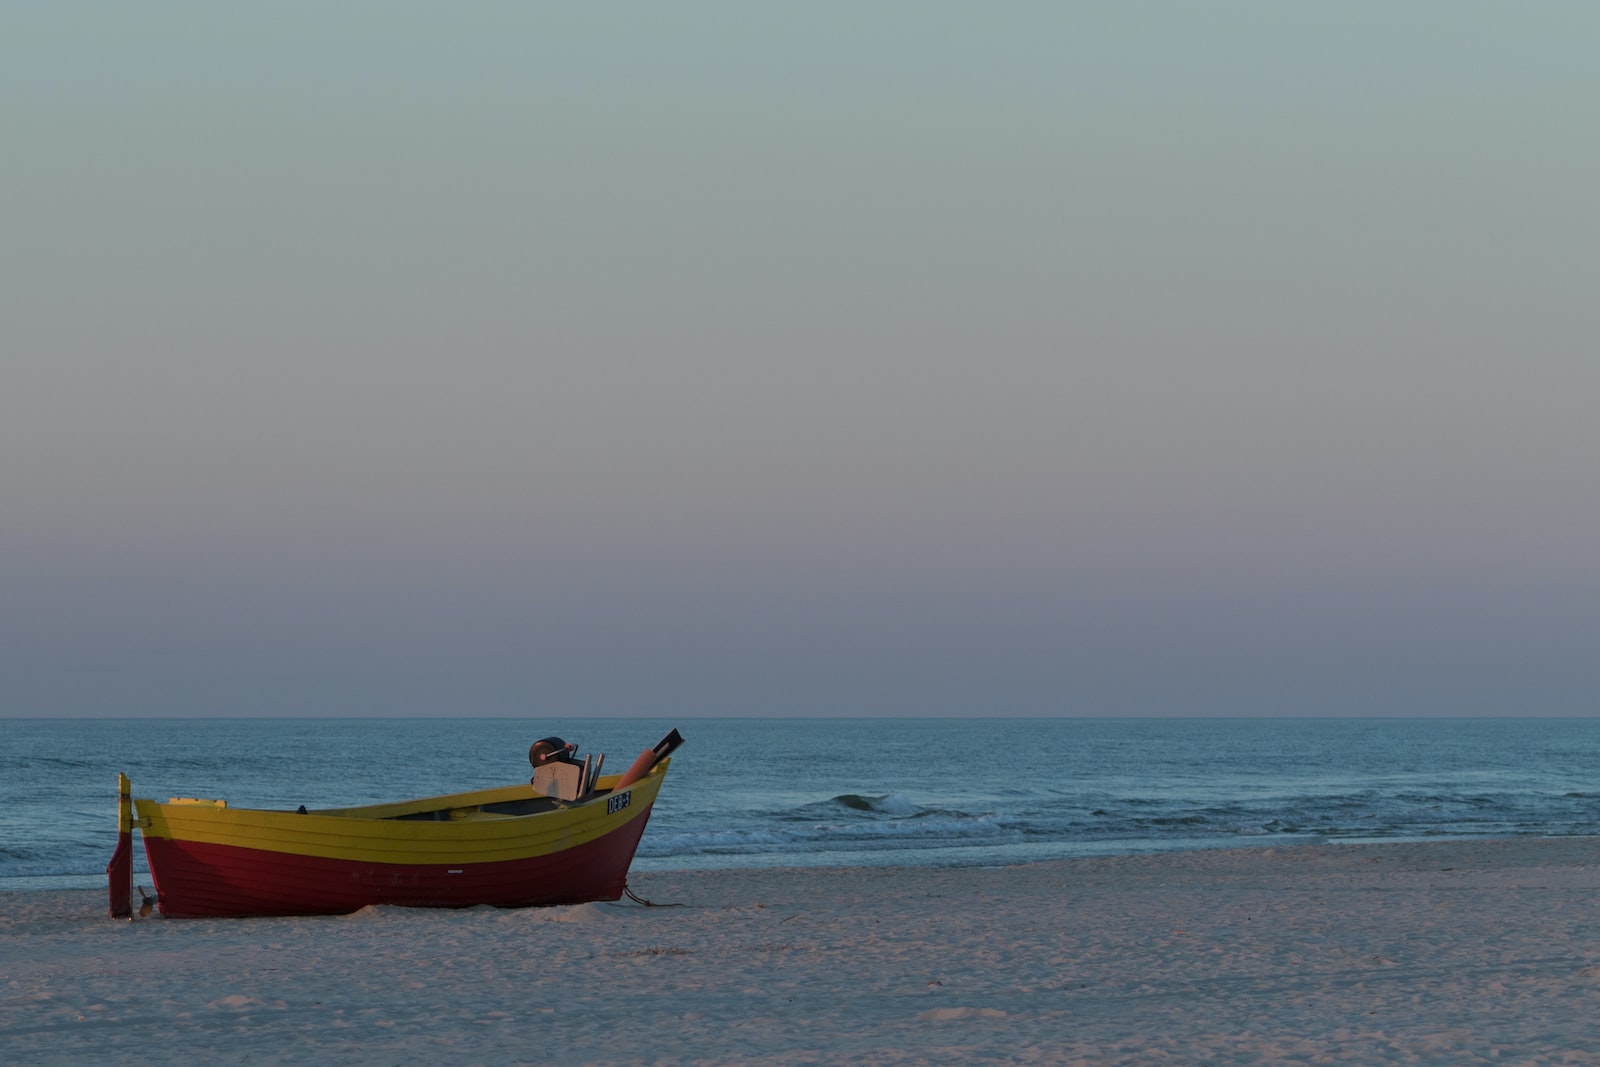 yellow and red boat on sea during daytime